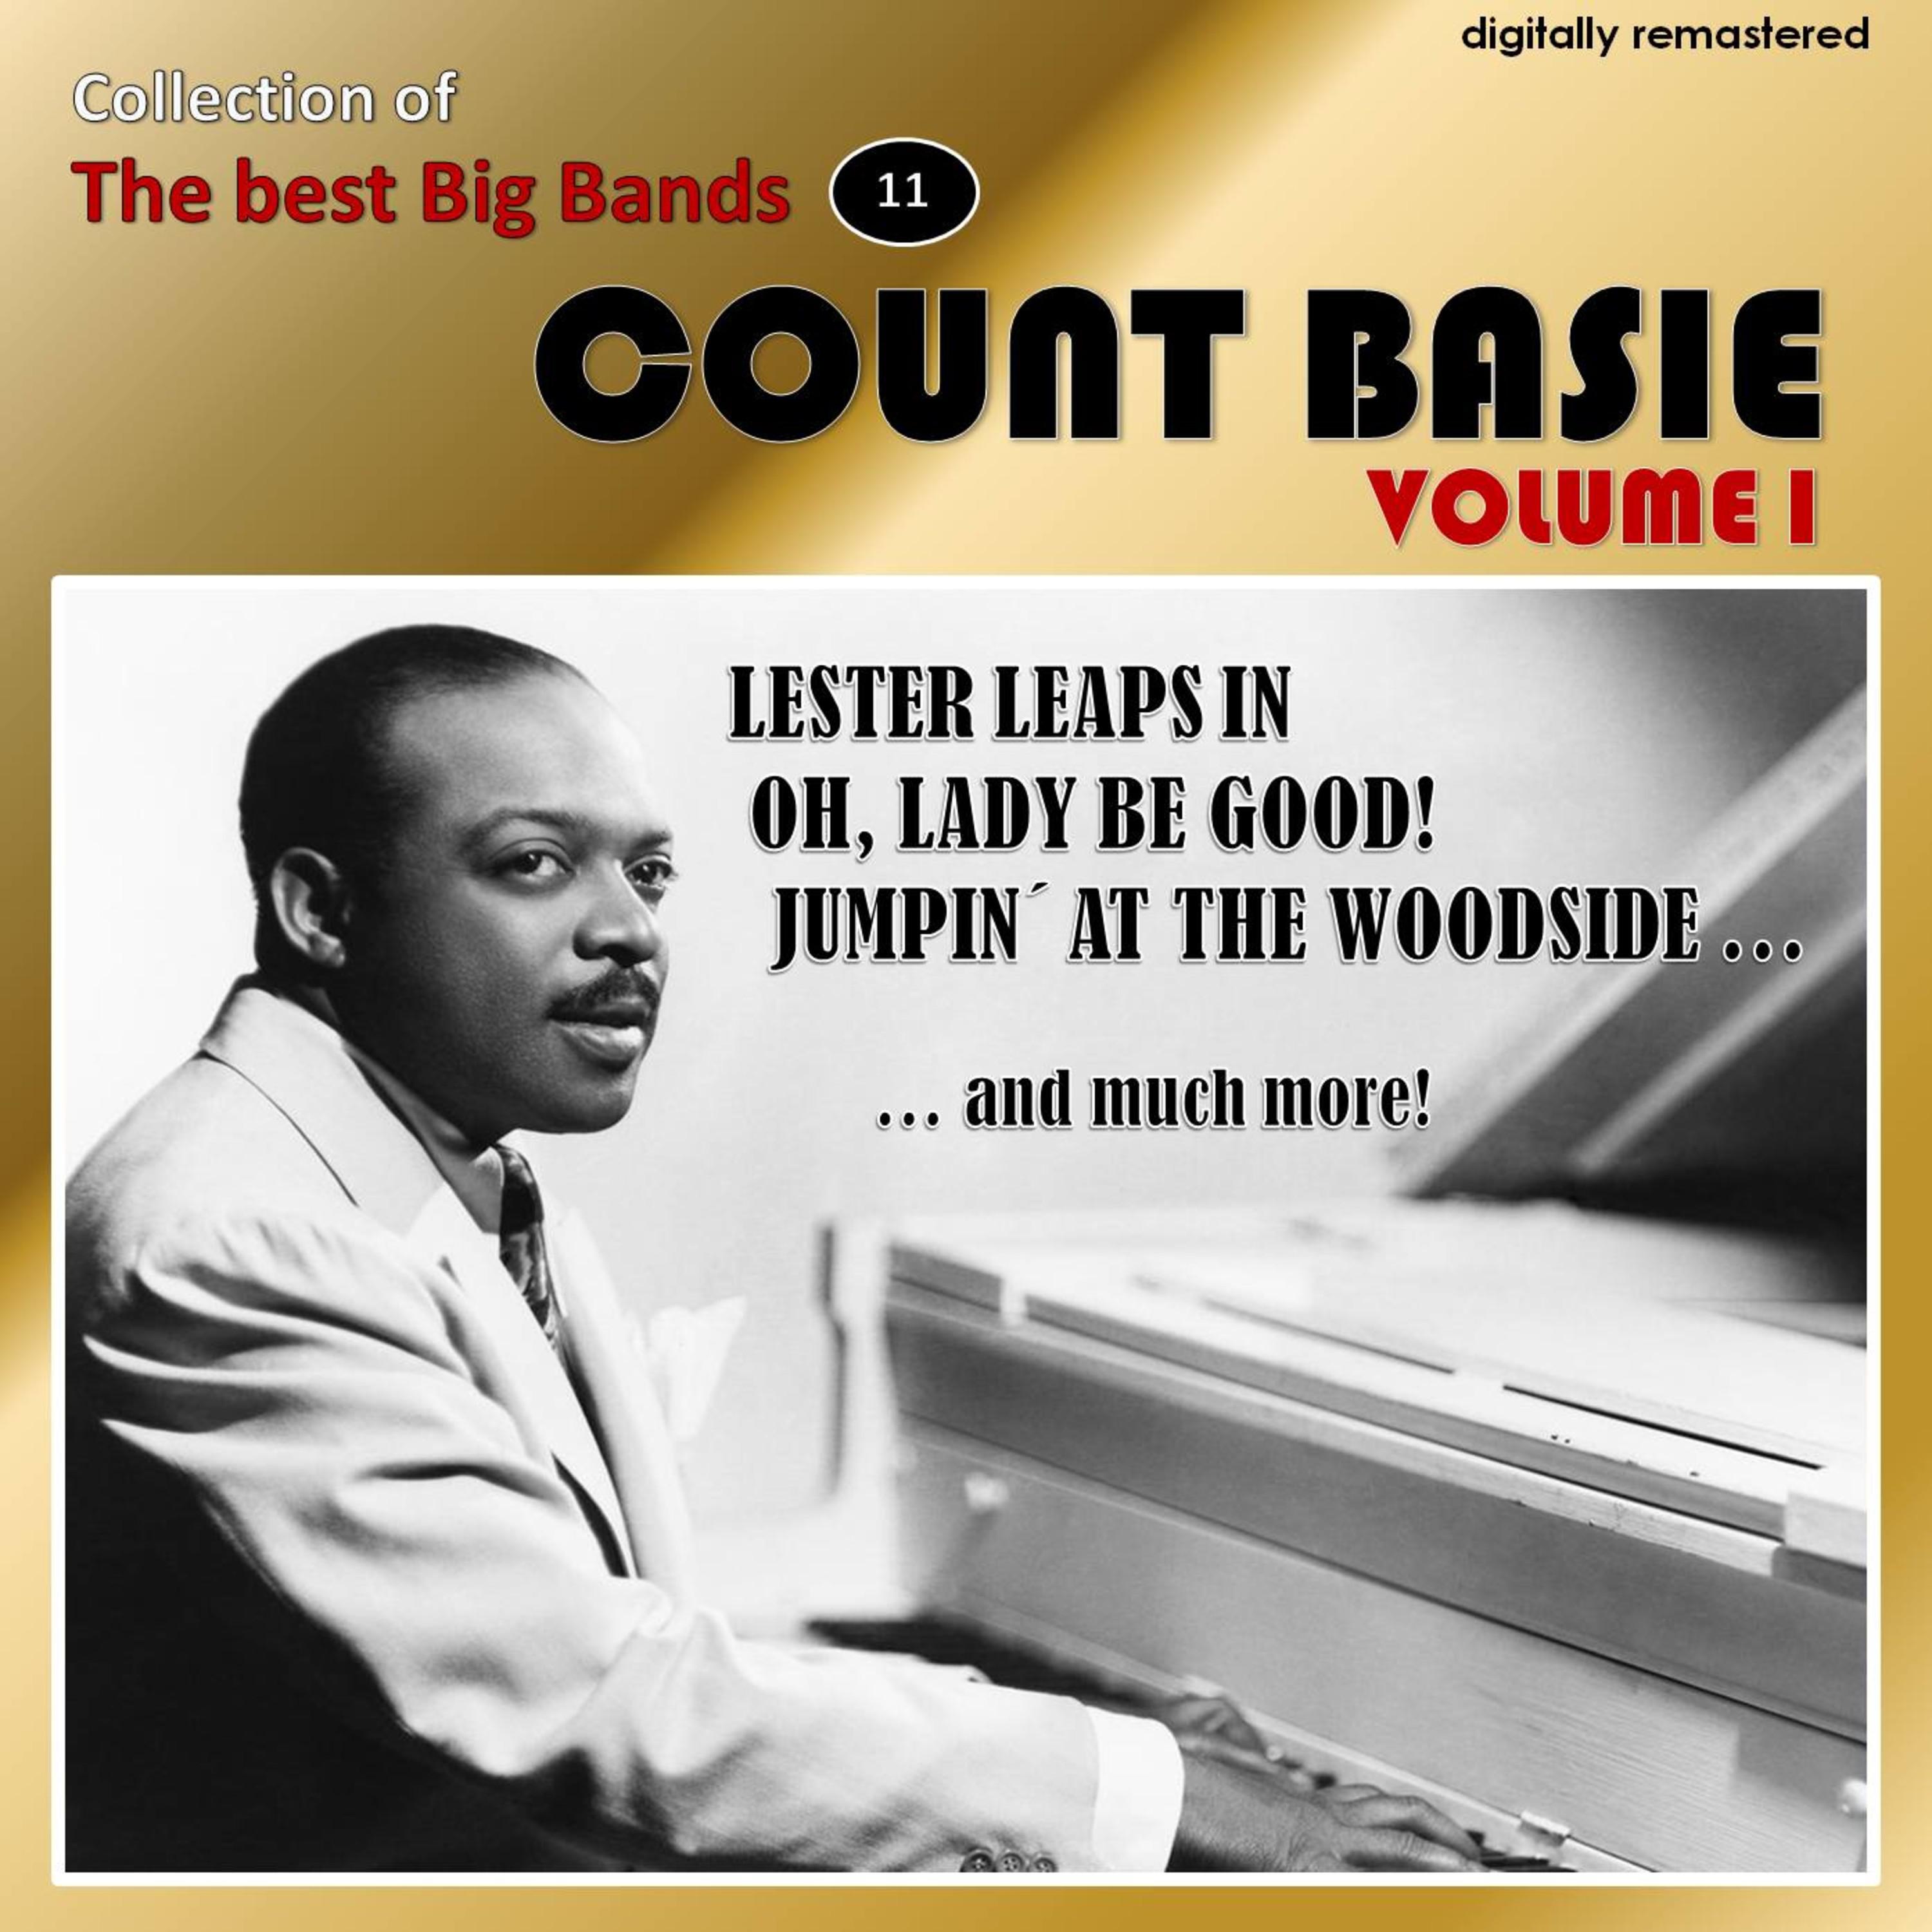 Collection of the Best Big Bands - Count Basie, Vol. 1 (Digitally Remastered)